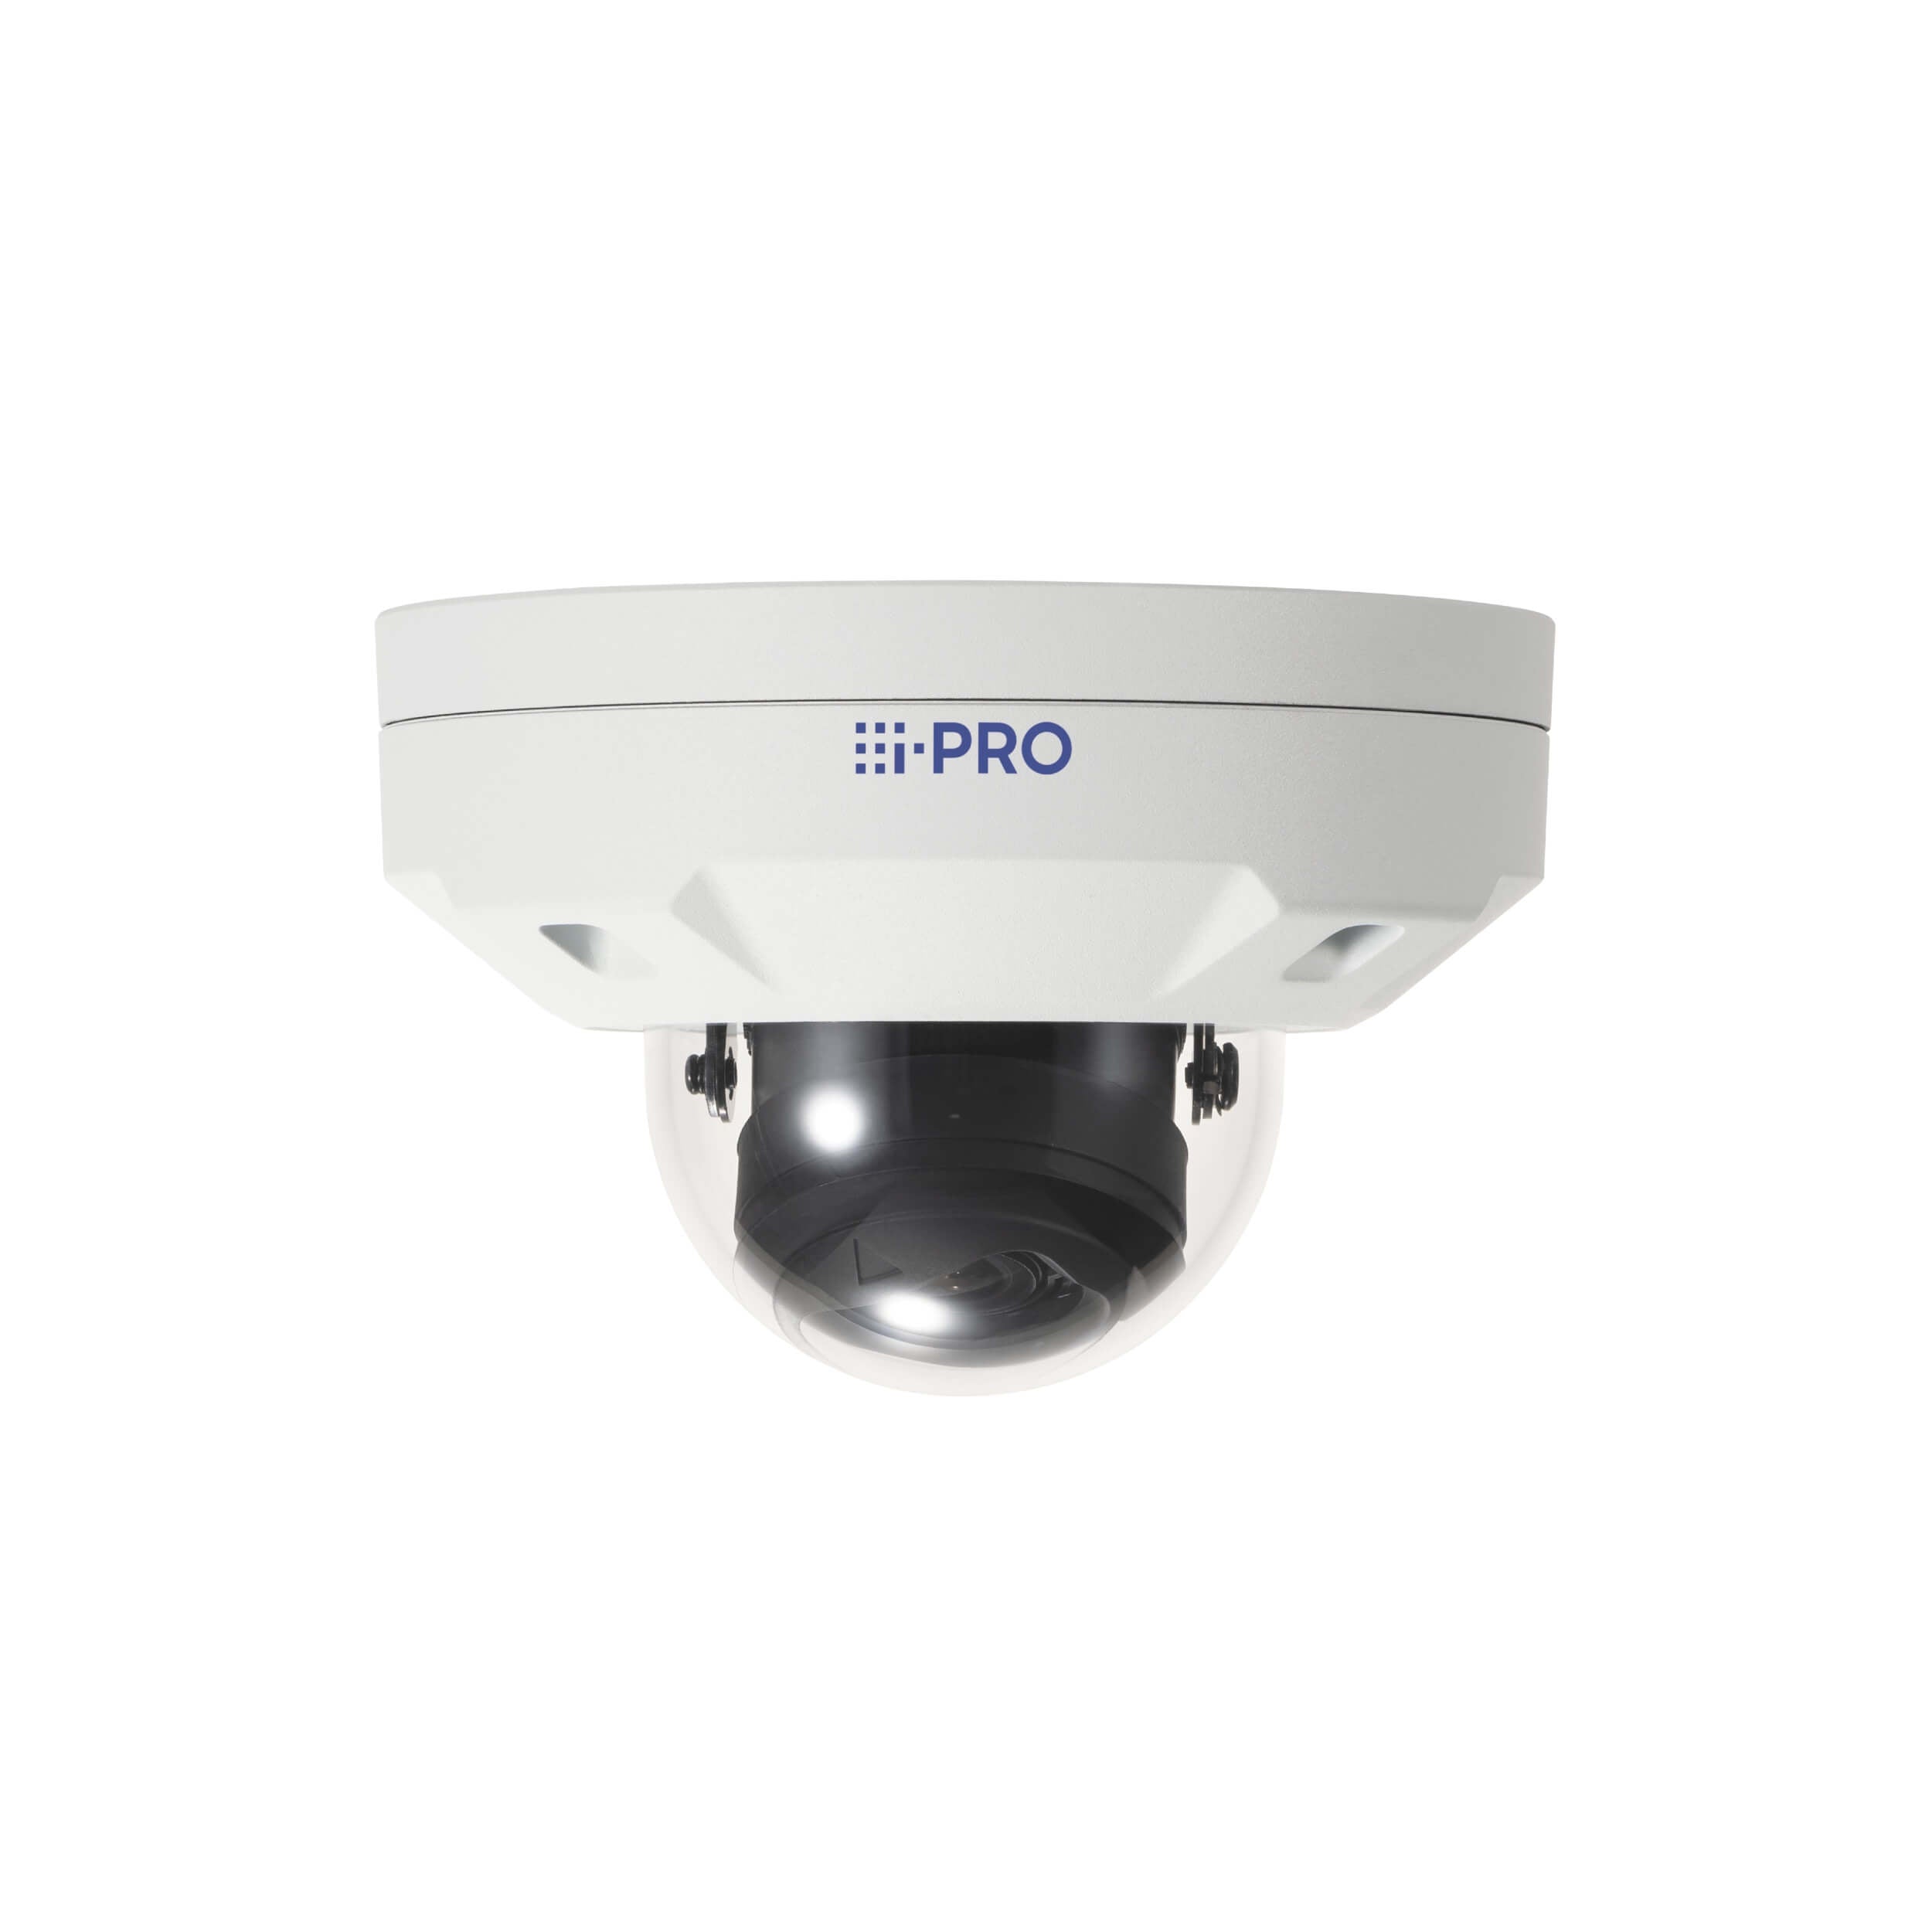 Panasonic WV-S25600-V2LN 6MP Vandal Resistant Outdoor Dome Network Camera with AI Engine with 4.3-8.6mm Lens